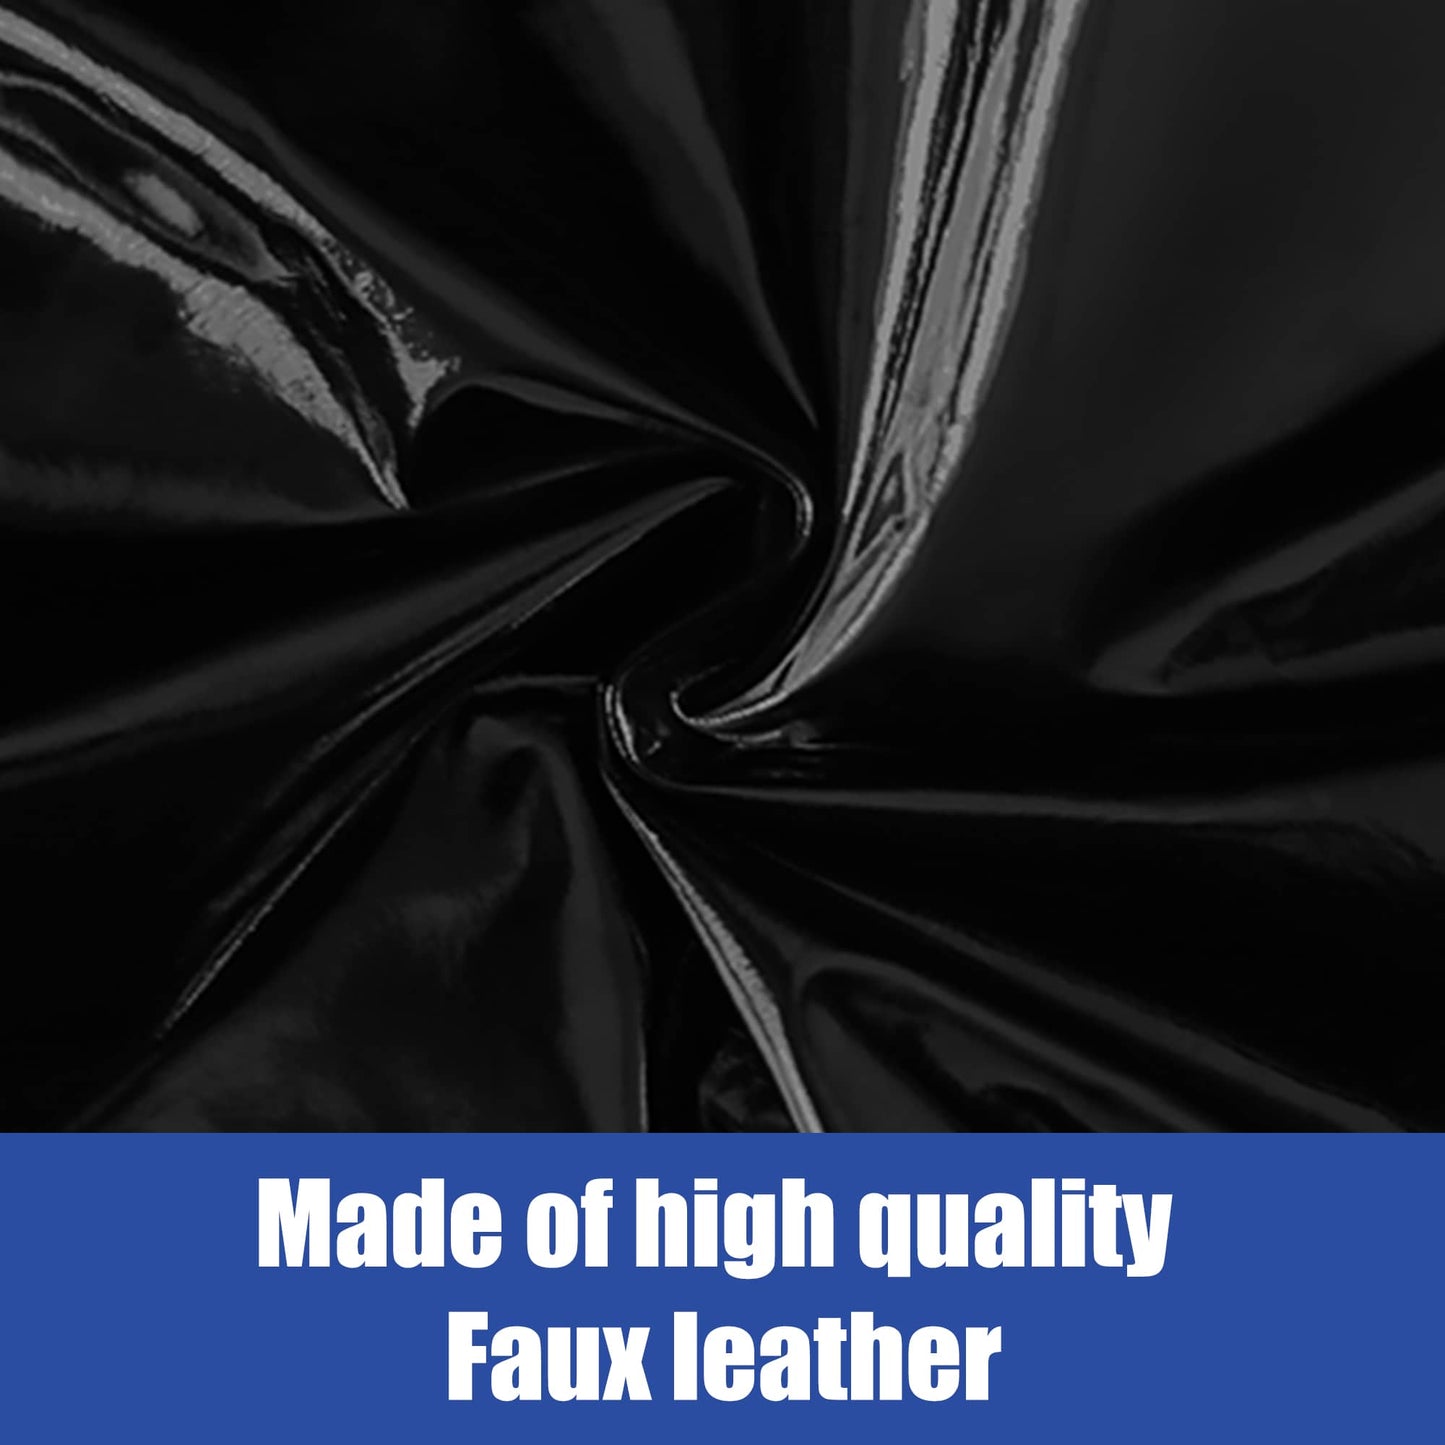 The black faux leather strap on shorts are made of high quality faux leather